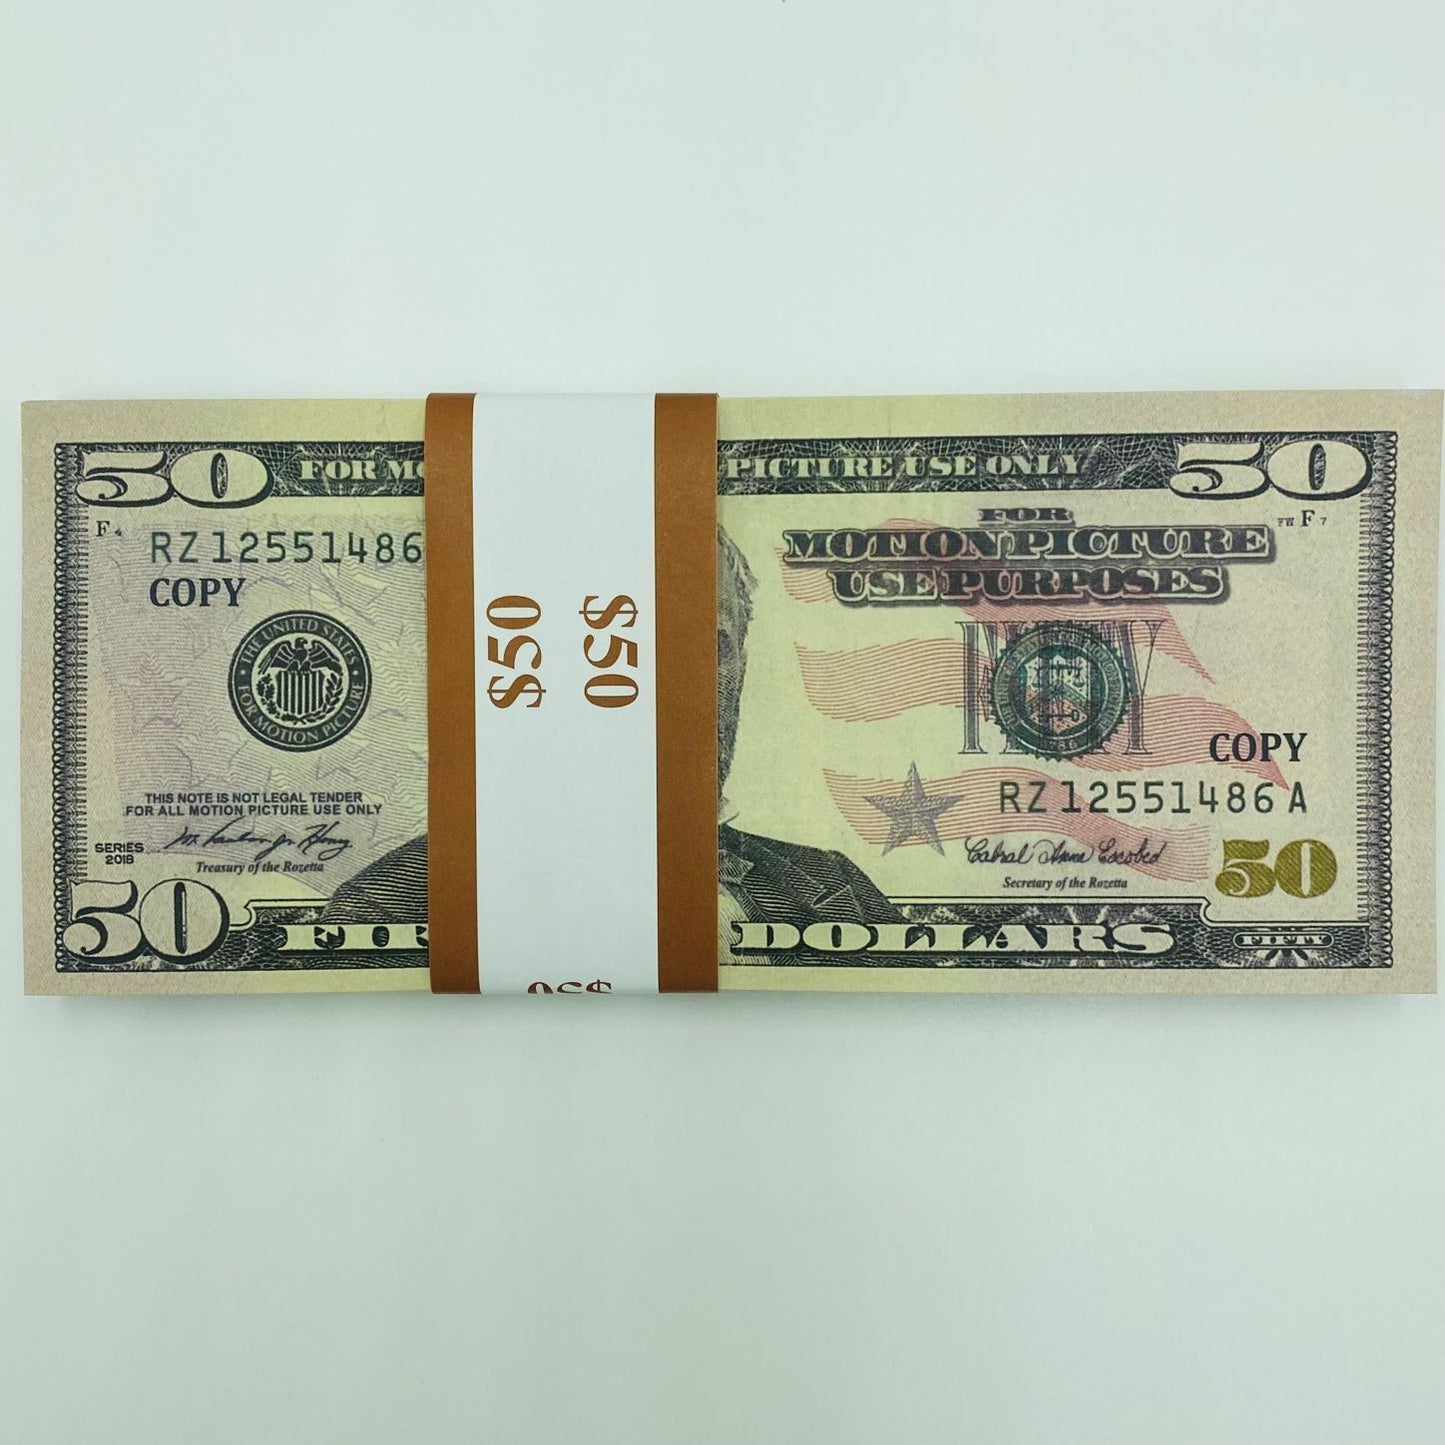 400 Pcs 50 US Dollar Replica Prop Money Double Sided Full Printed